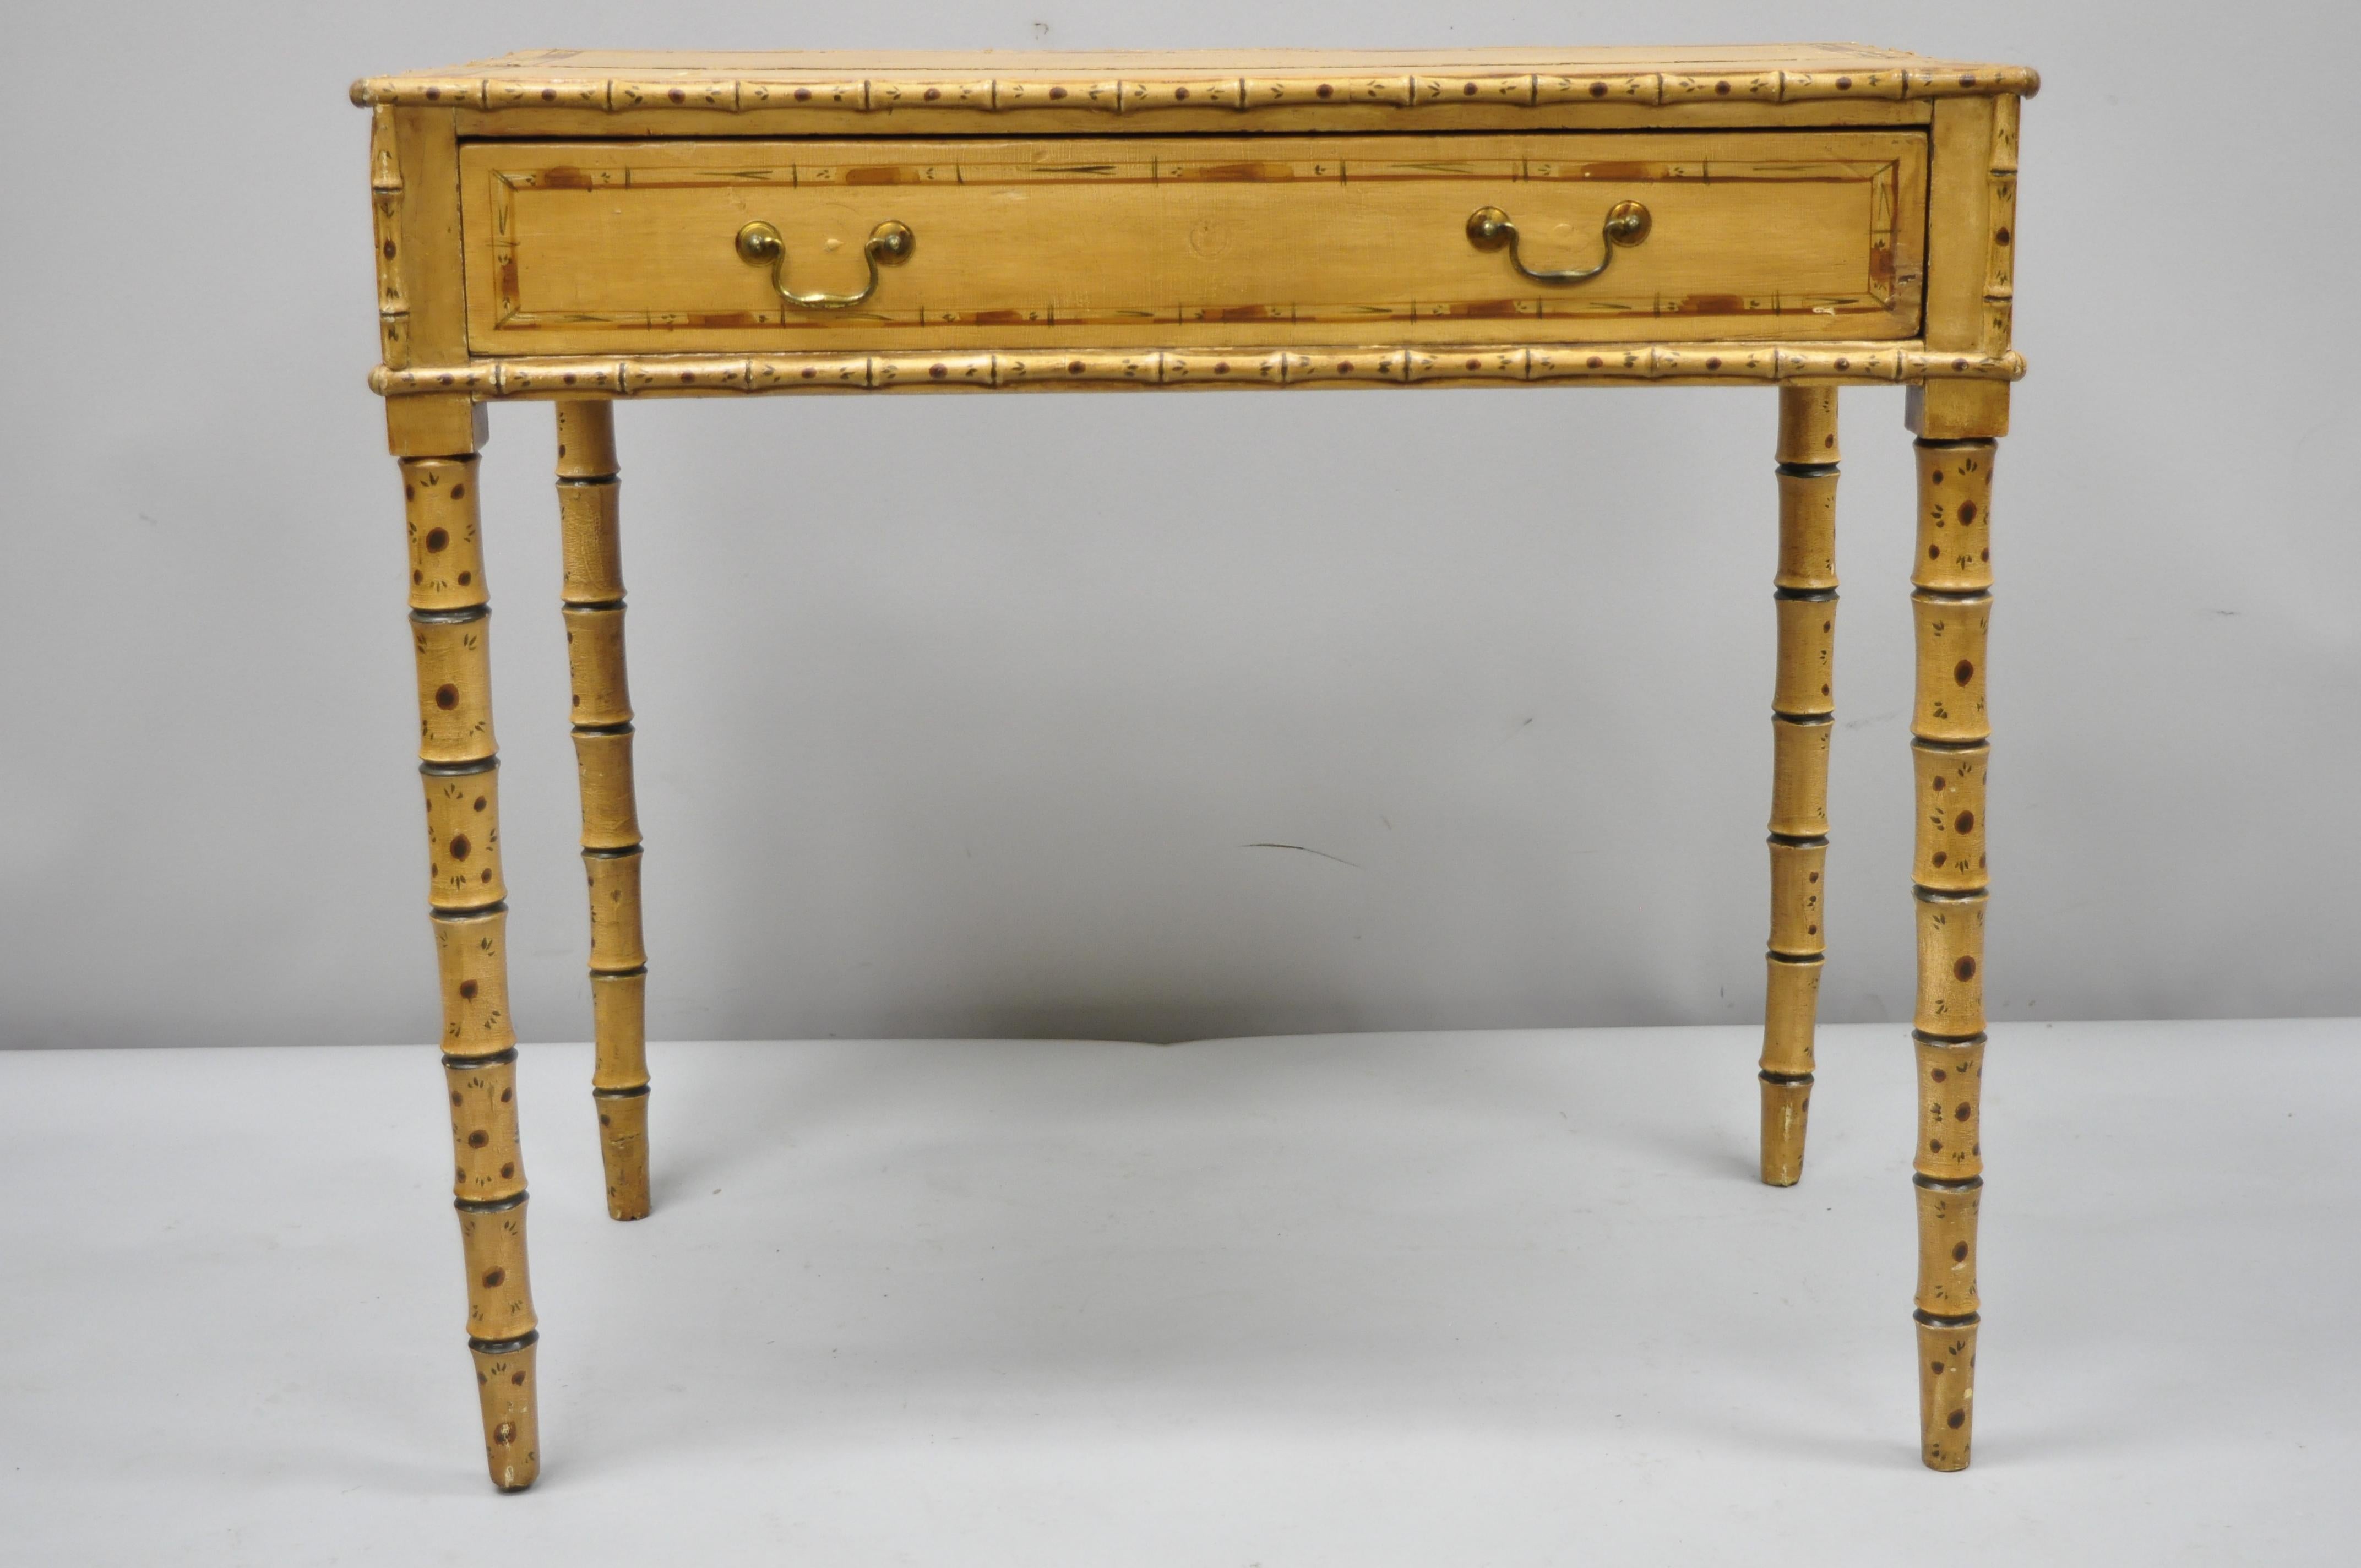 19th century English Victoria pine faux bamboo painted yellow small desk side table. Item features original hand painted details, turn carved faux bamboo legs, compartments to drawer, 1 dovetail drawer, very nice antique item,19th century.